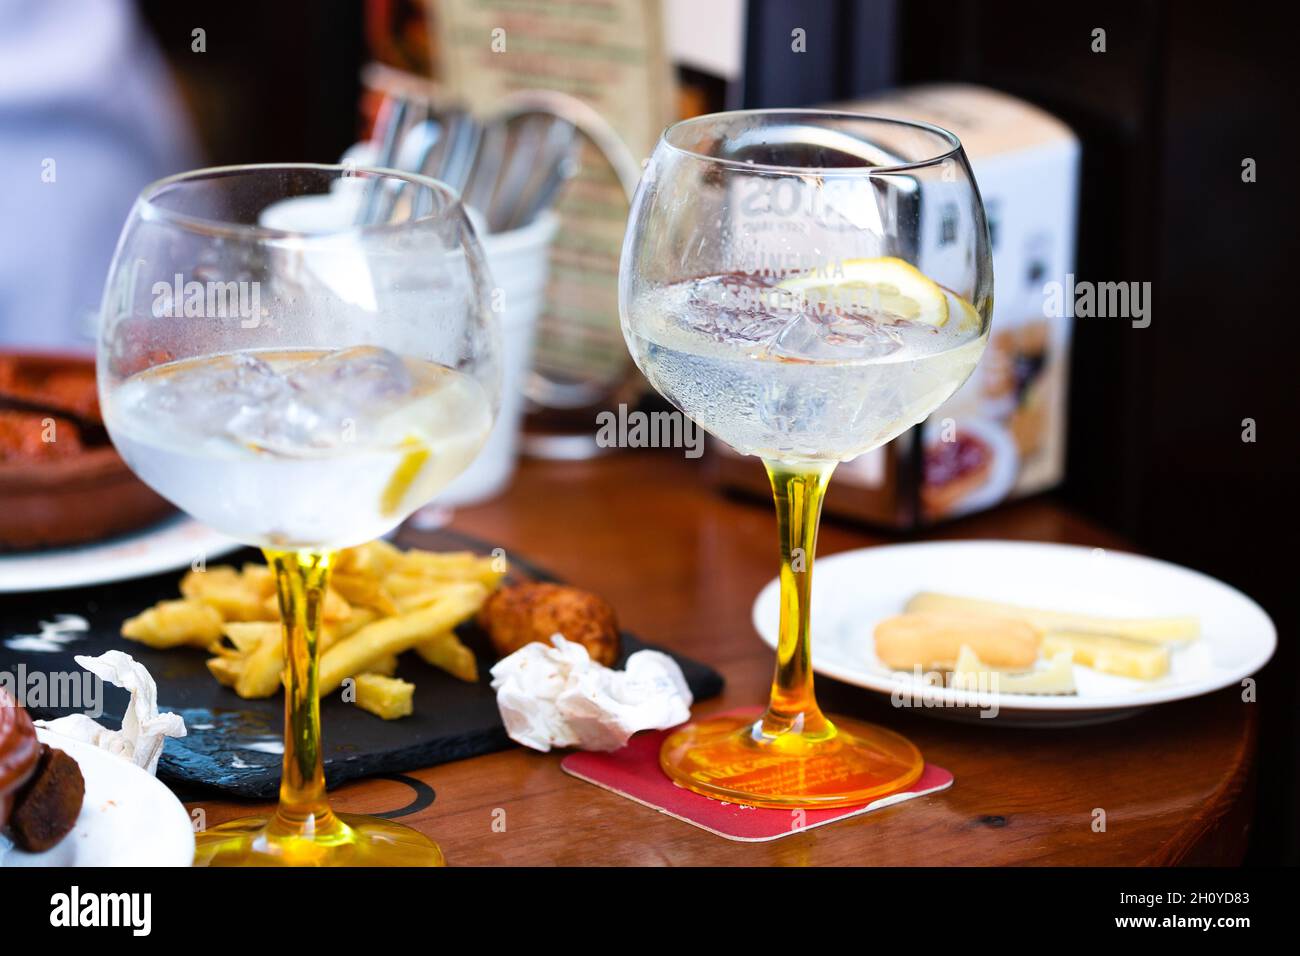 Lunch, finished.,  Restaurant, Spain Stock Photo